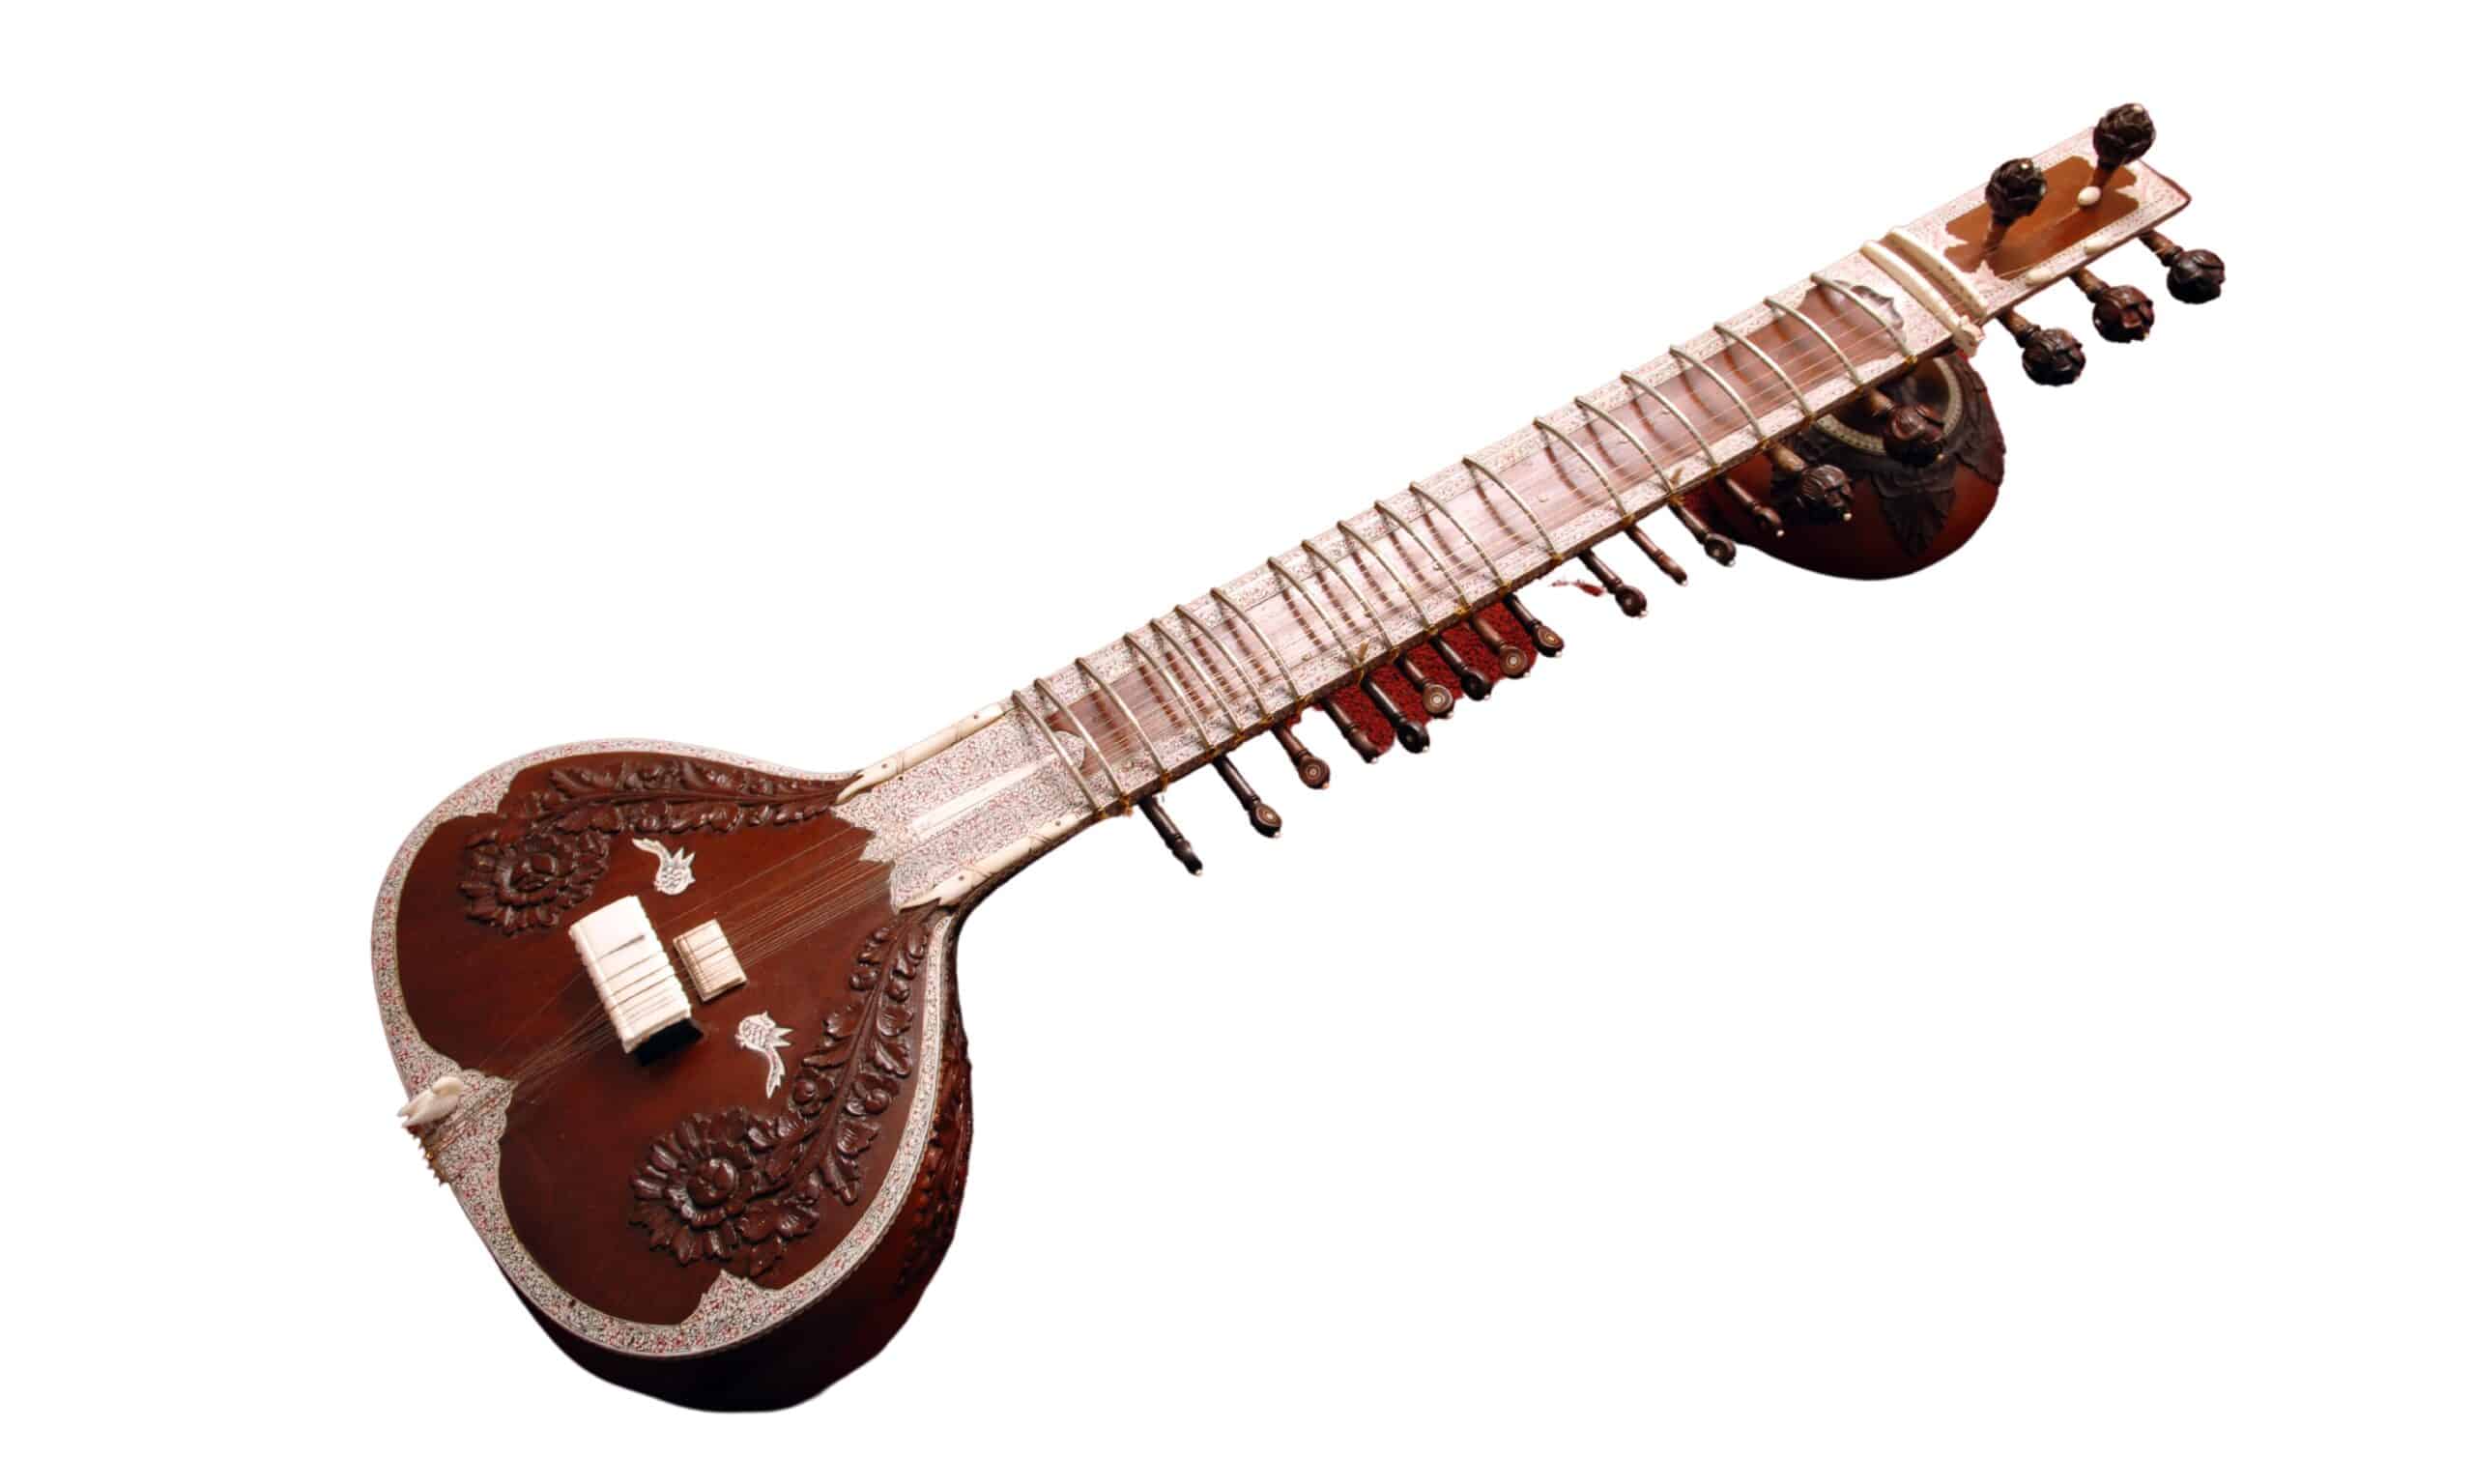 Sitar Music Instrument Isolated On Clear Background.